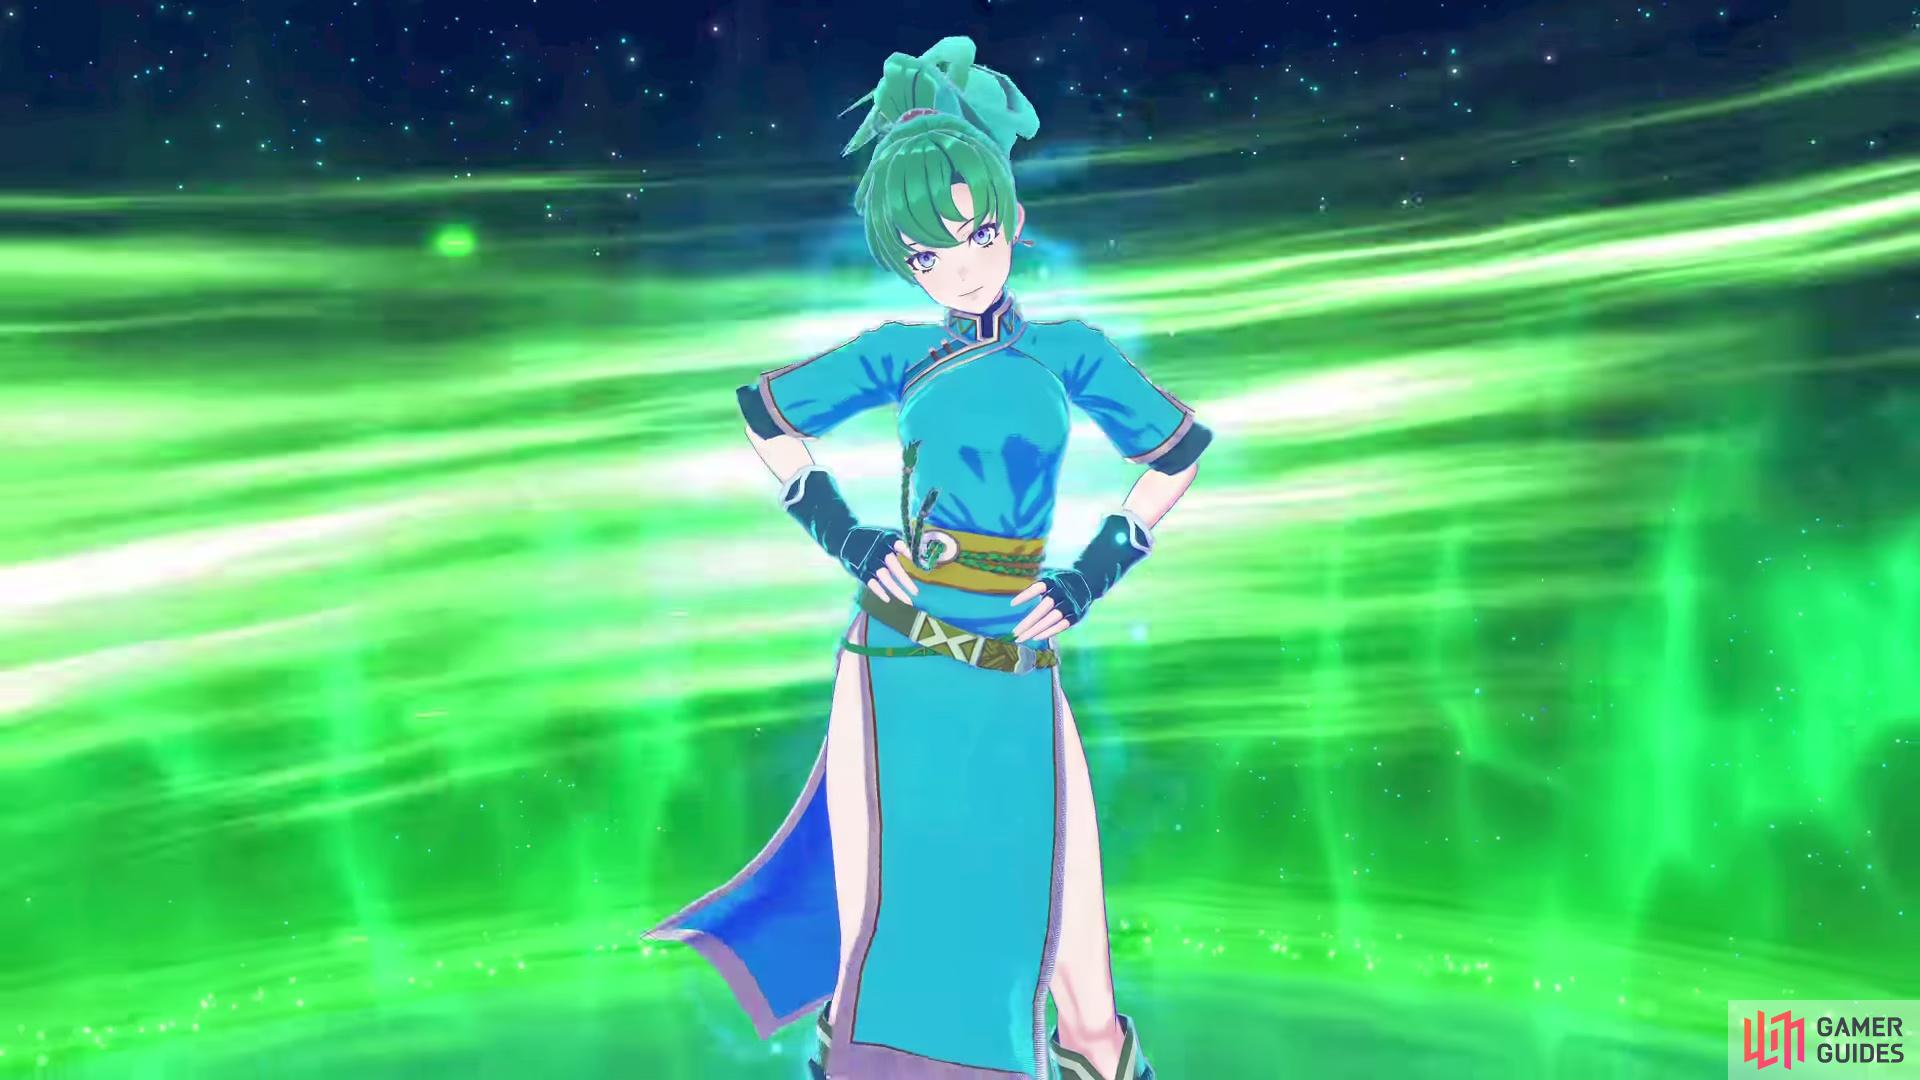 You will get Lyn's Emblem during the battle in Chapter 11.